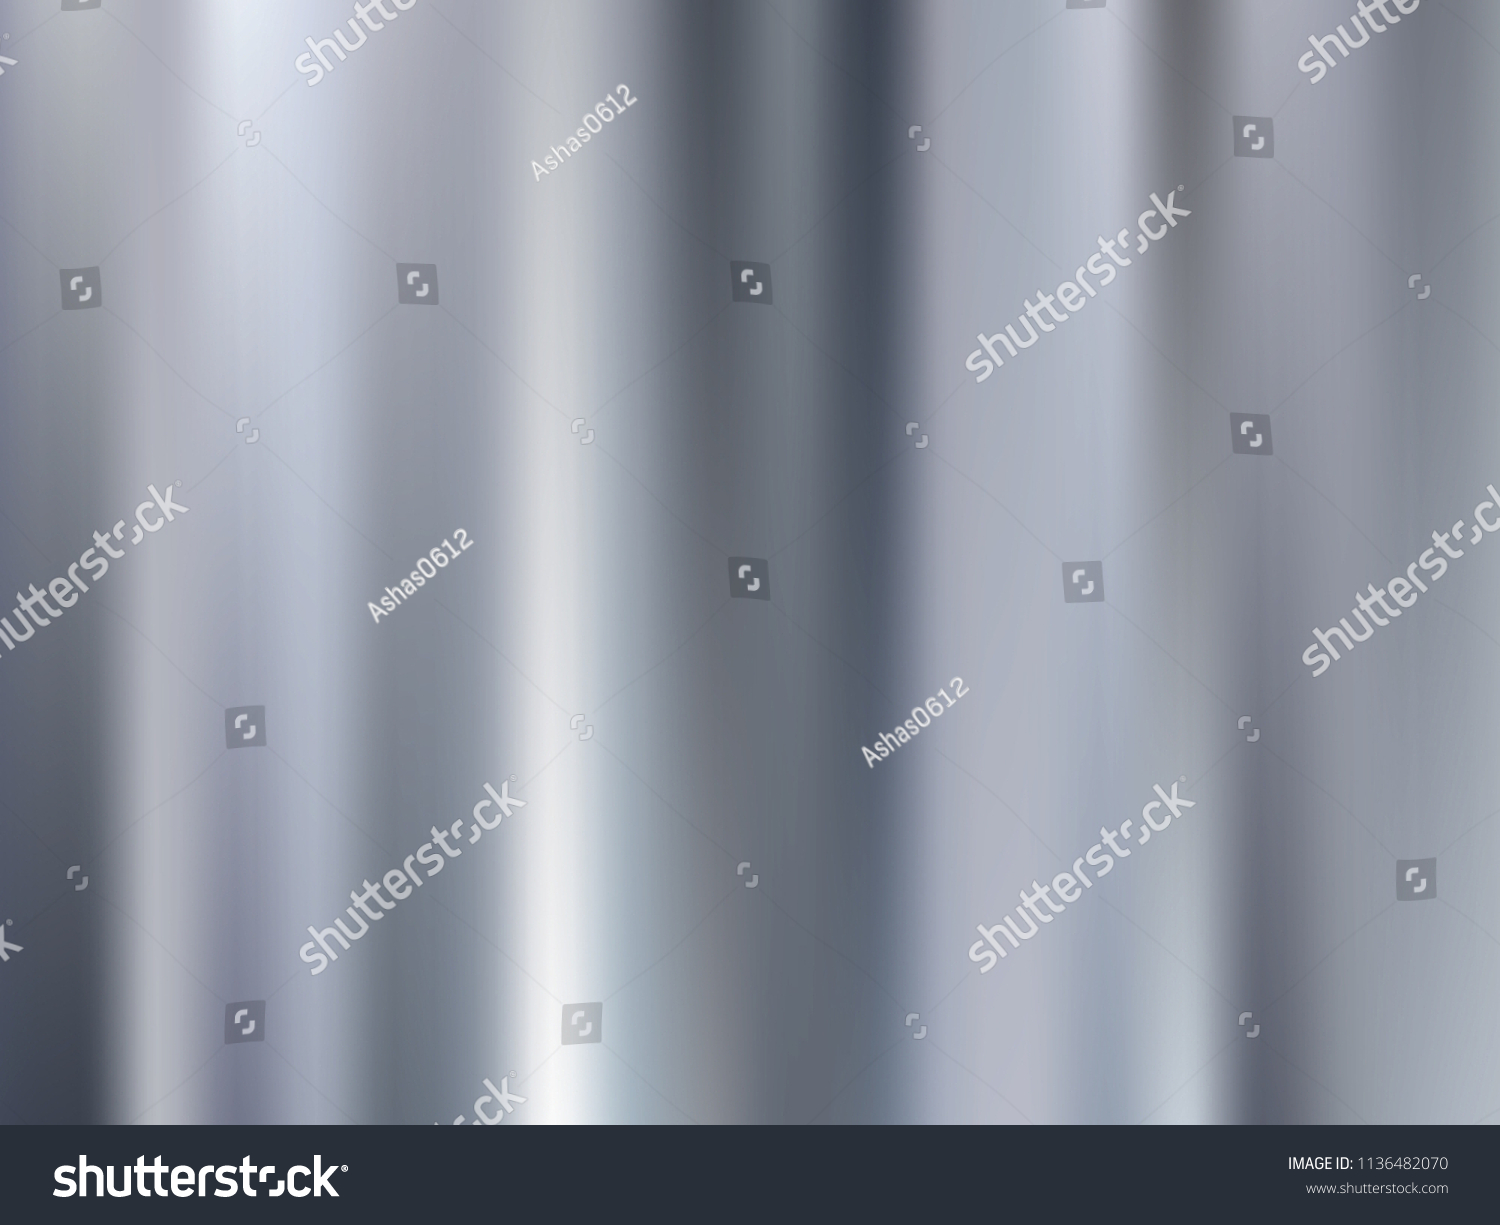 gray abstract background, vector background for metal silver presentations #1136482070